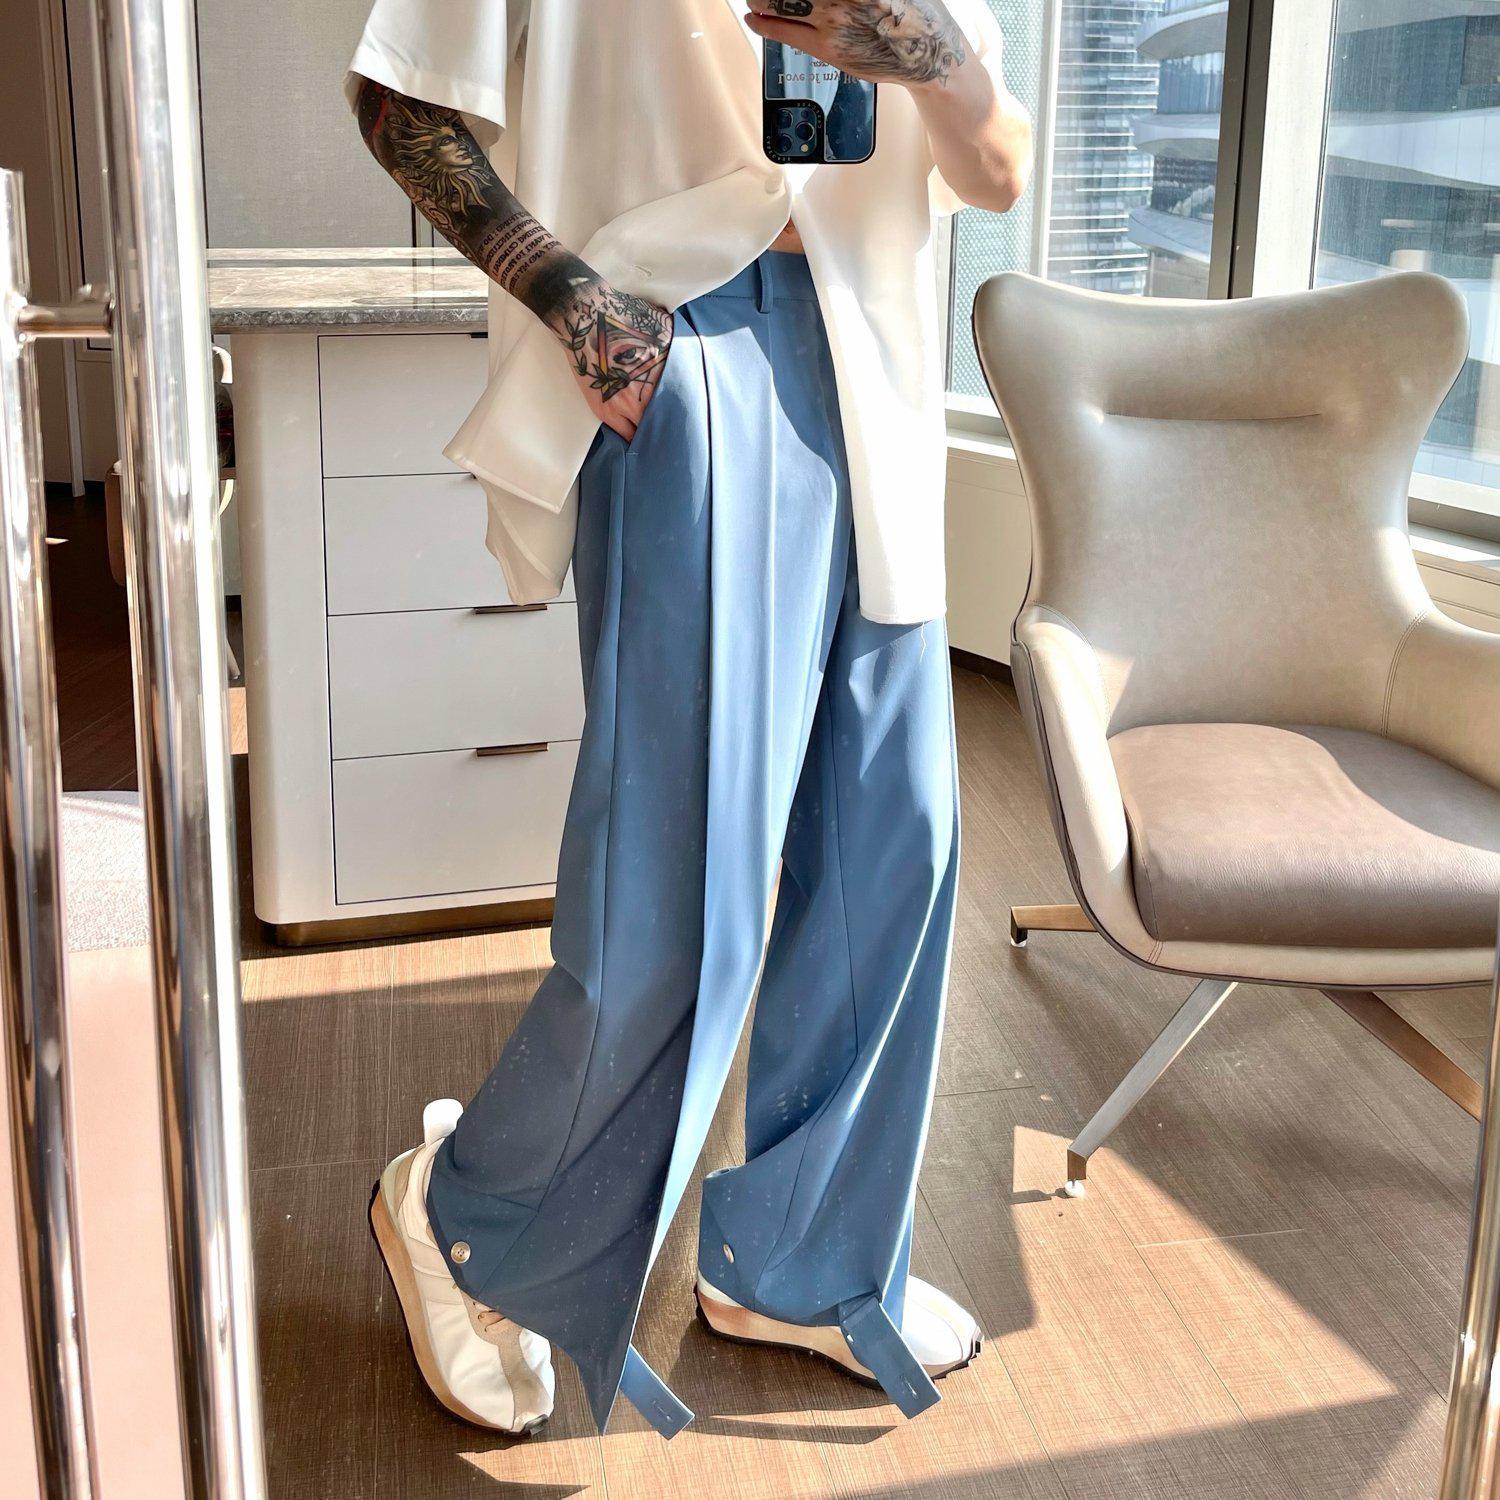 Fakanhui Women's Satin Silky Dress Casual Elastic High Waist Stretch  Elegant Pants Trousers X-Small at  Women's Clothing store